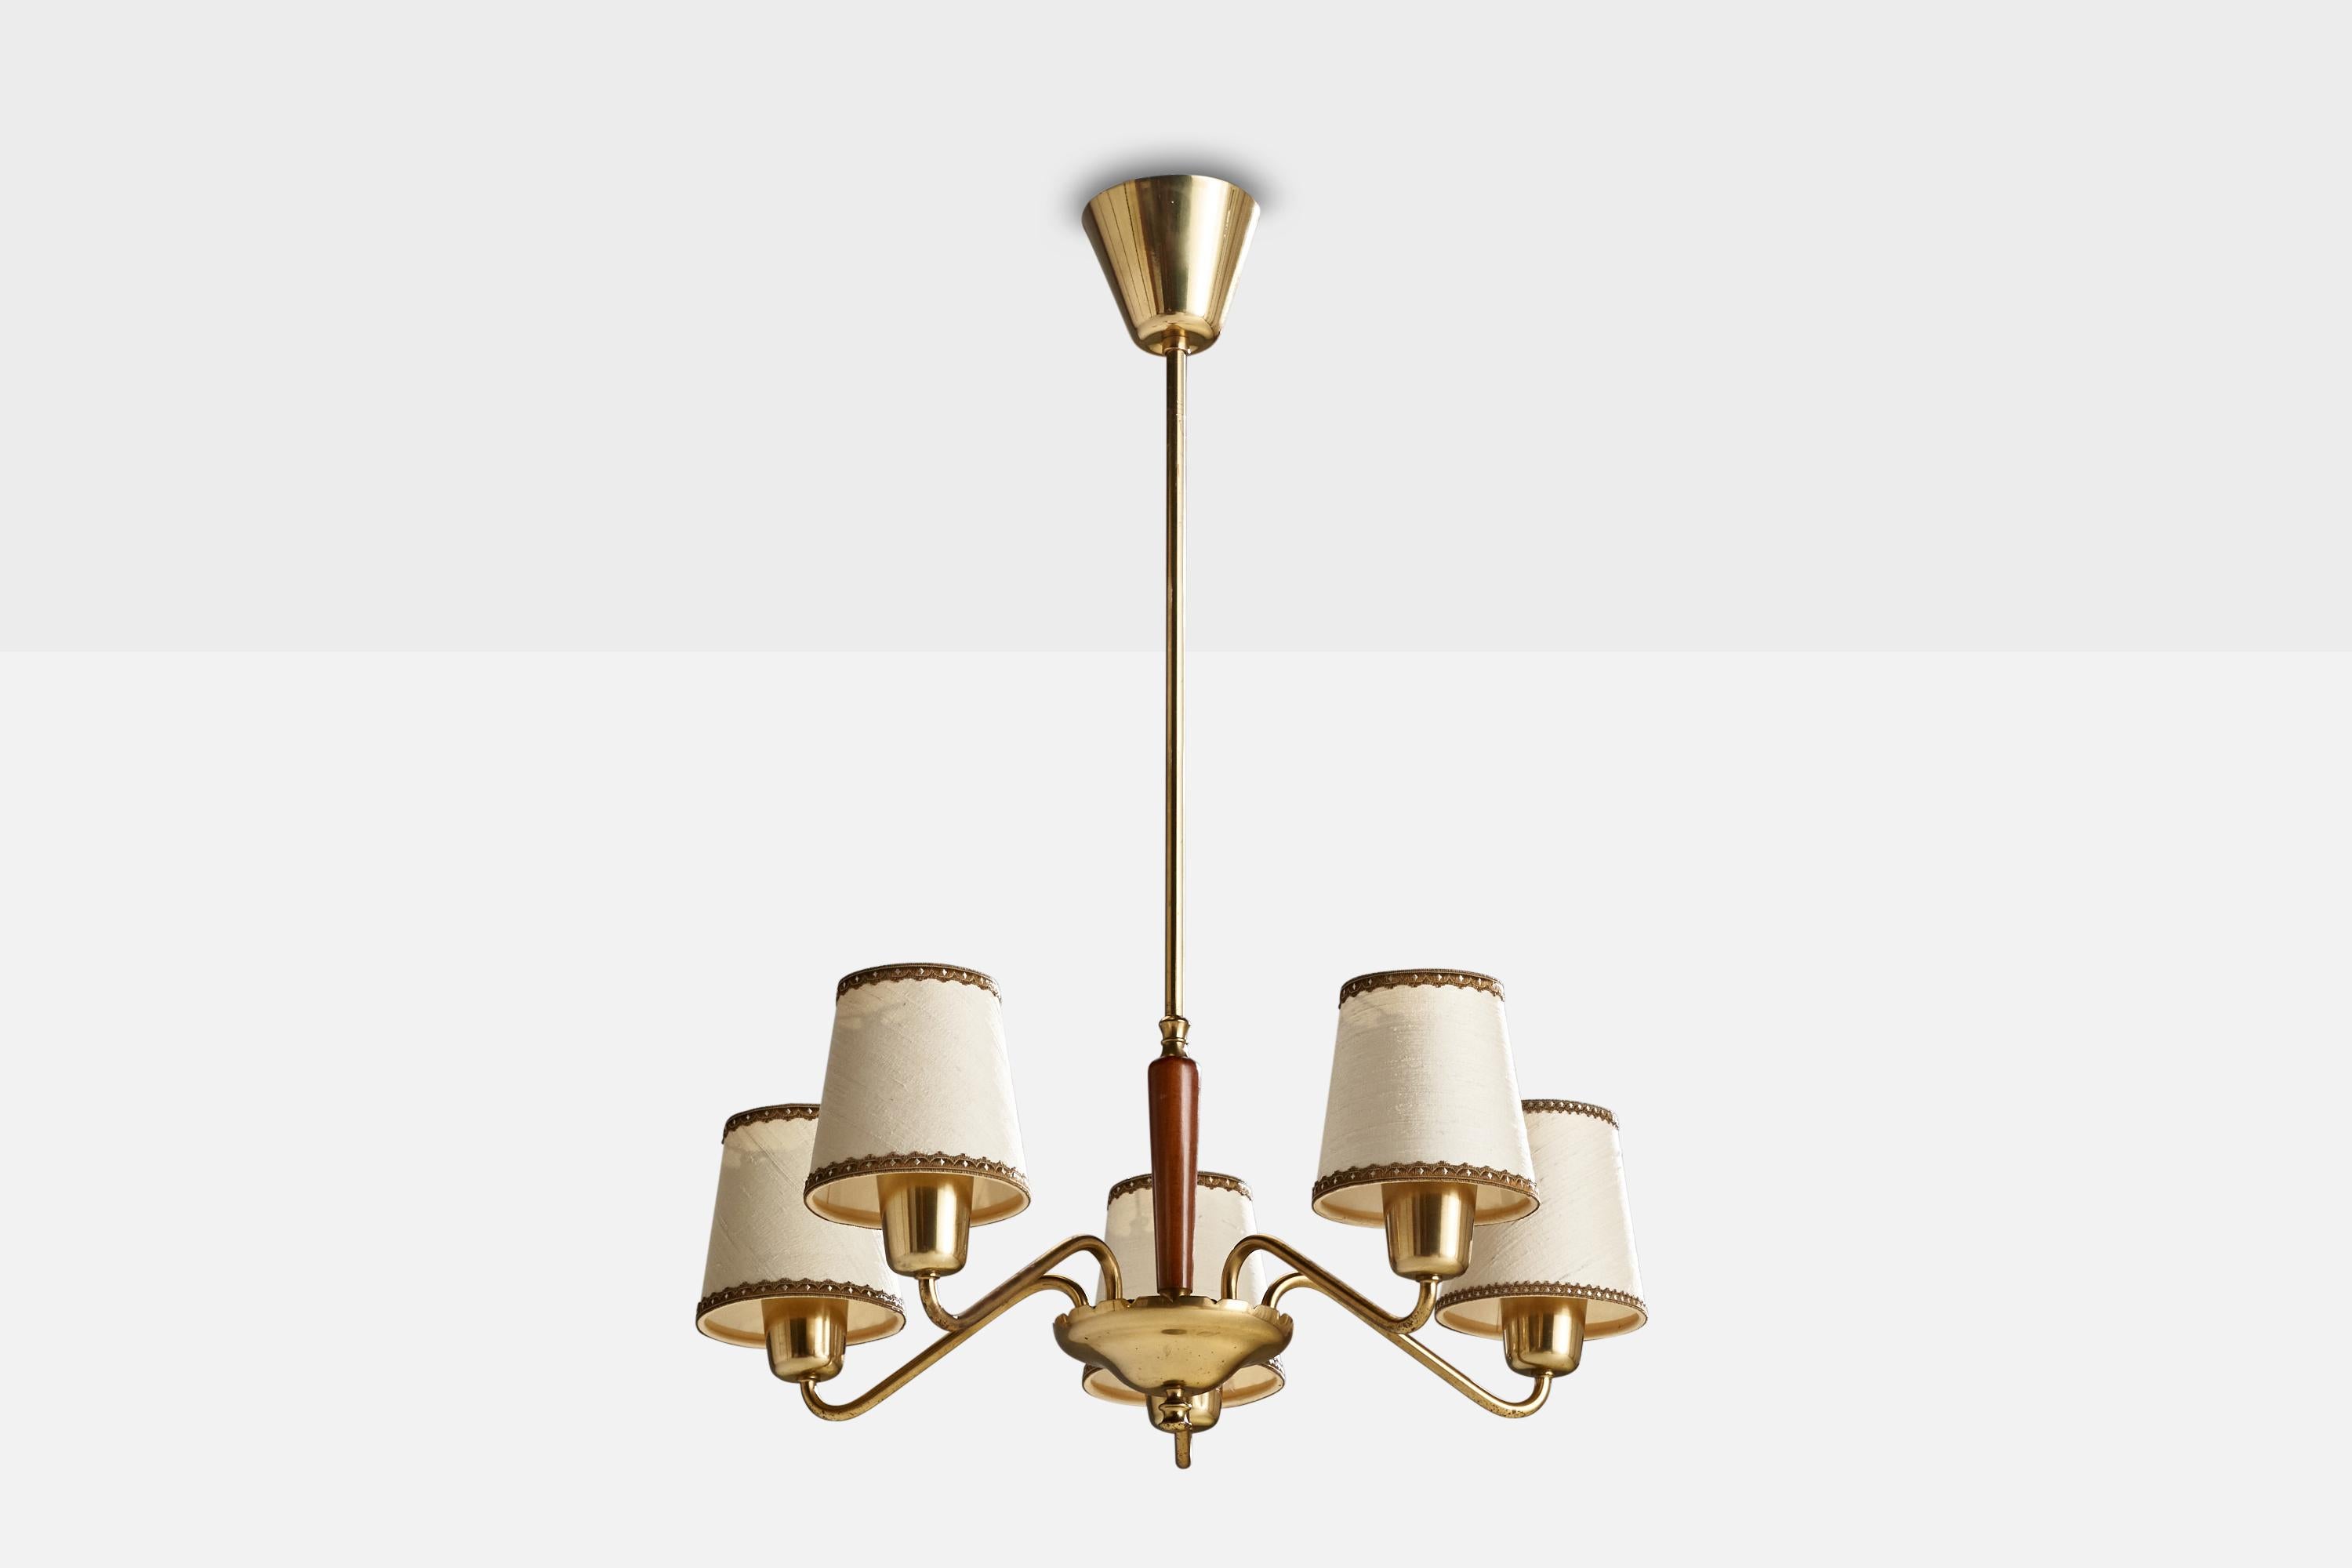 A brass, stained wood and off-white fabric chandelier designed and produced in Sweden, 1940s.

Dimensions of canopy (inches): 3.09” H x 3.54” Diameter
Socket takes standard E-26 bulbs. 5 socket.There is no maximum wattage stated on the fixture. All